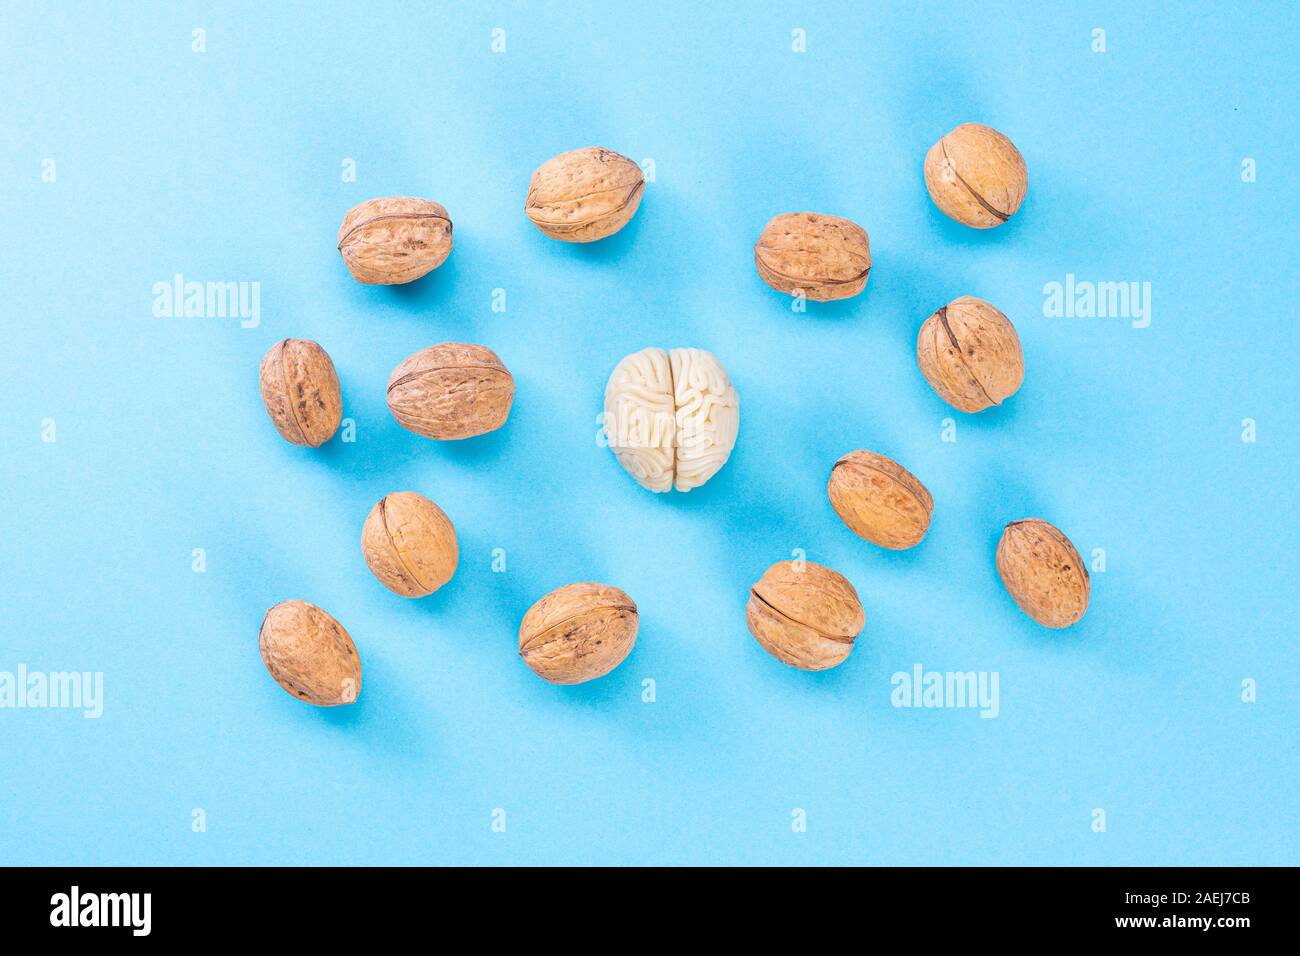 The shape of the human brain is surrounded by walnut kernels. This symbolizes the similarity of the brain with walnuts and the proven effectiveness as Stock Photo